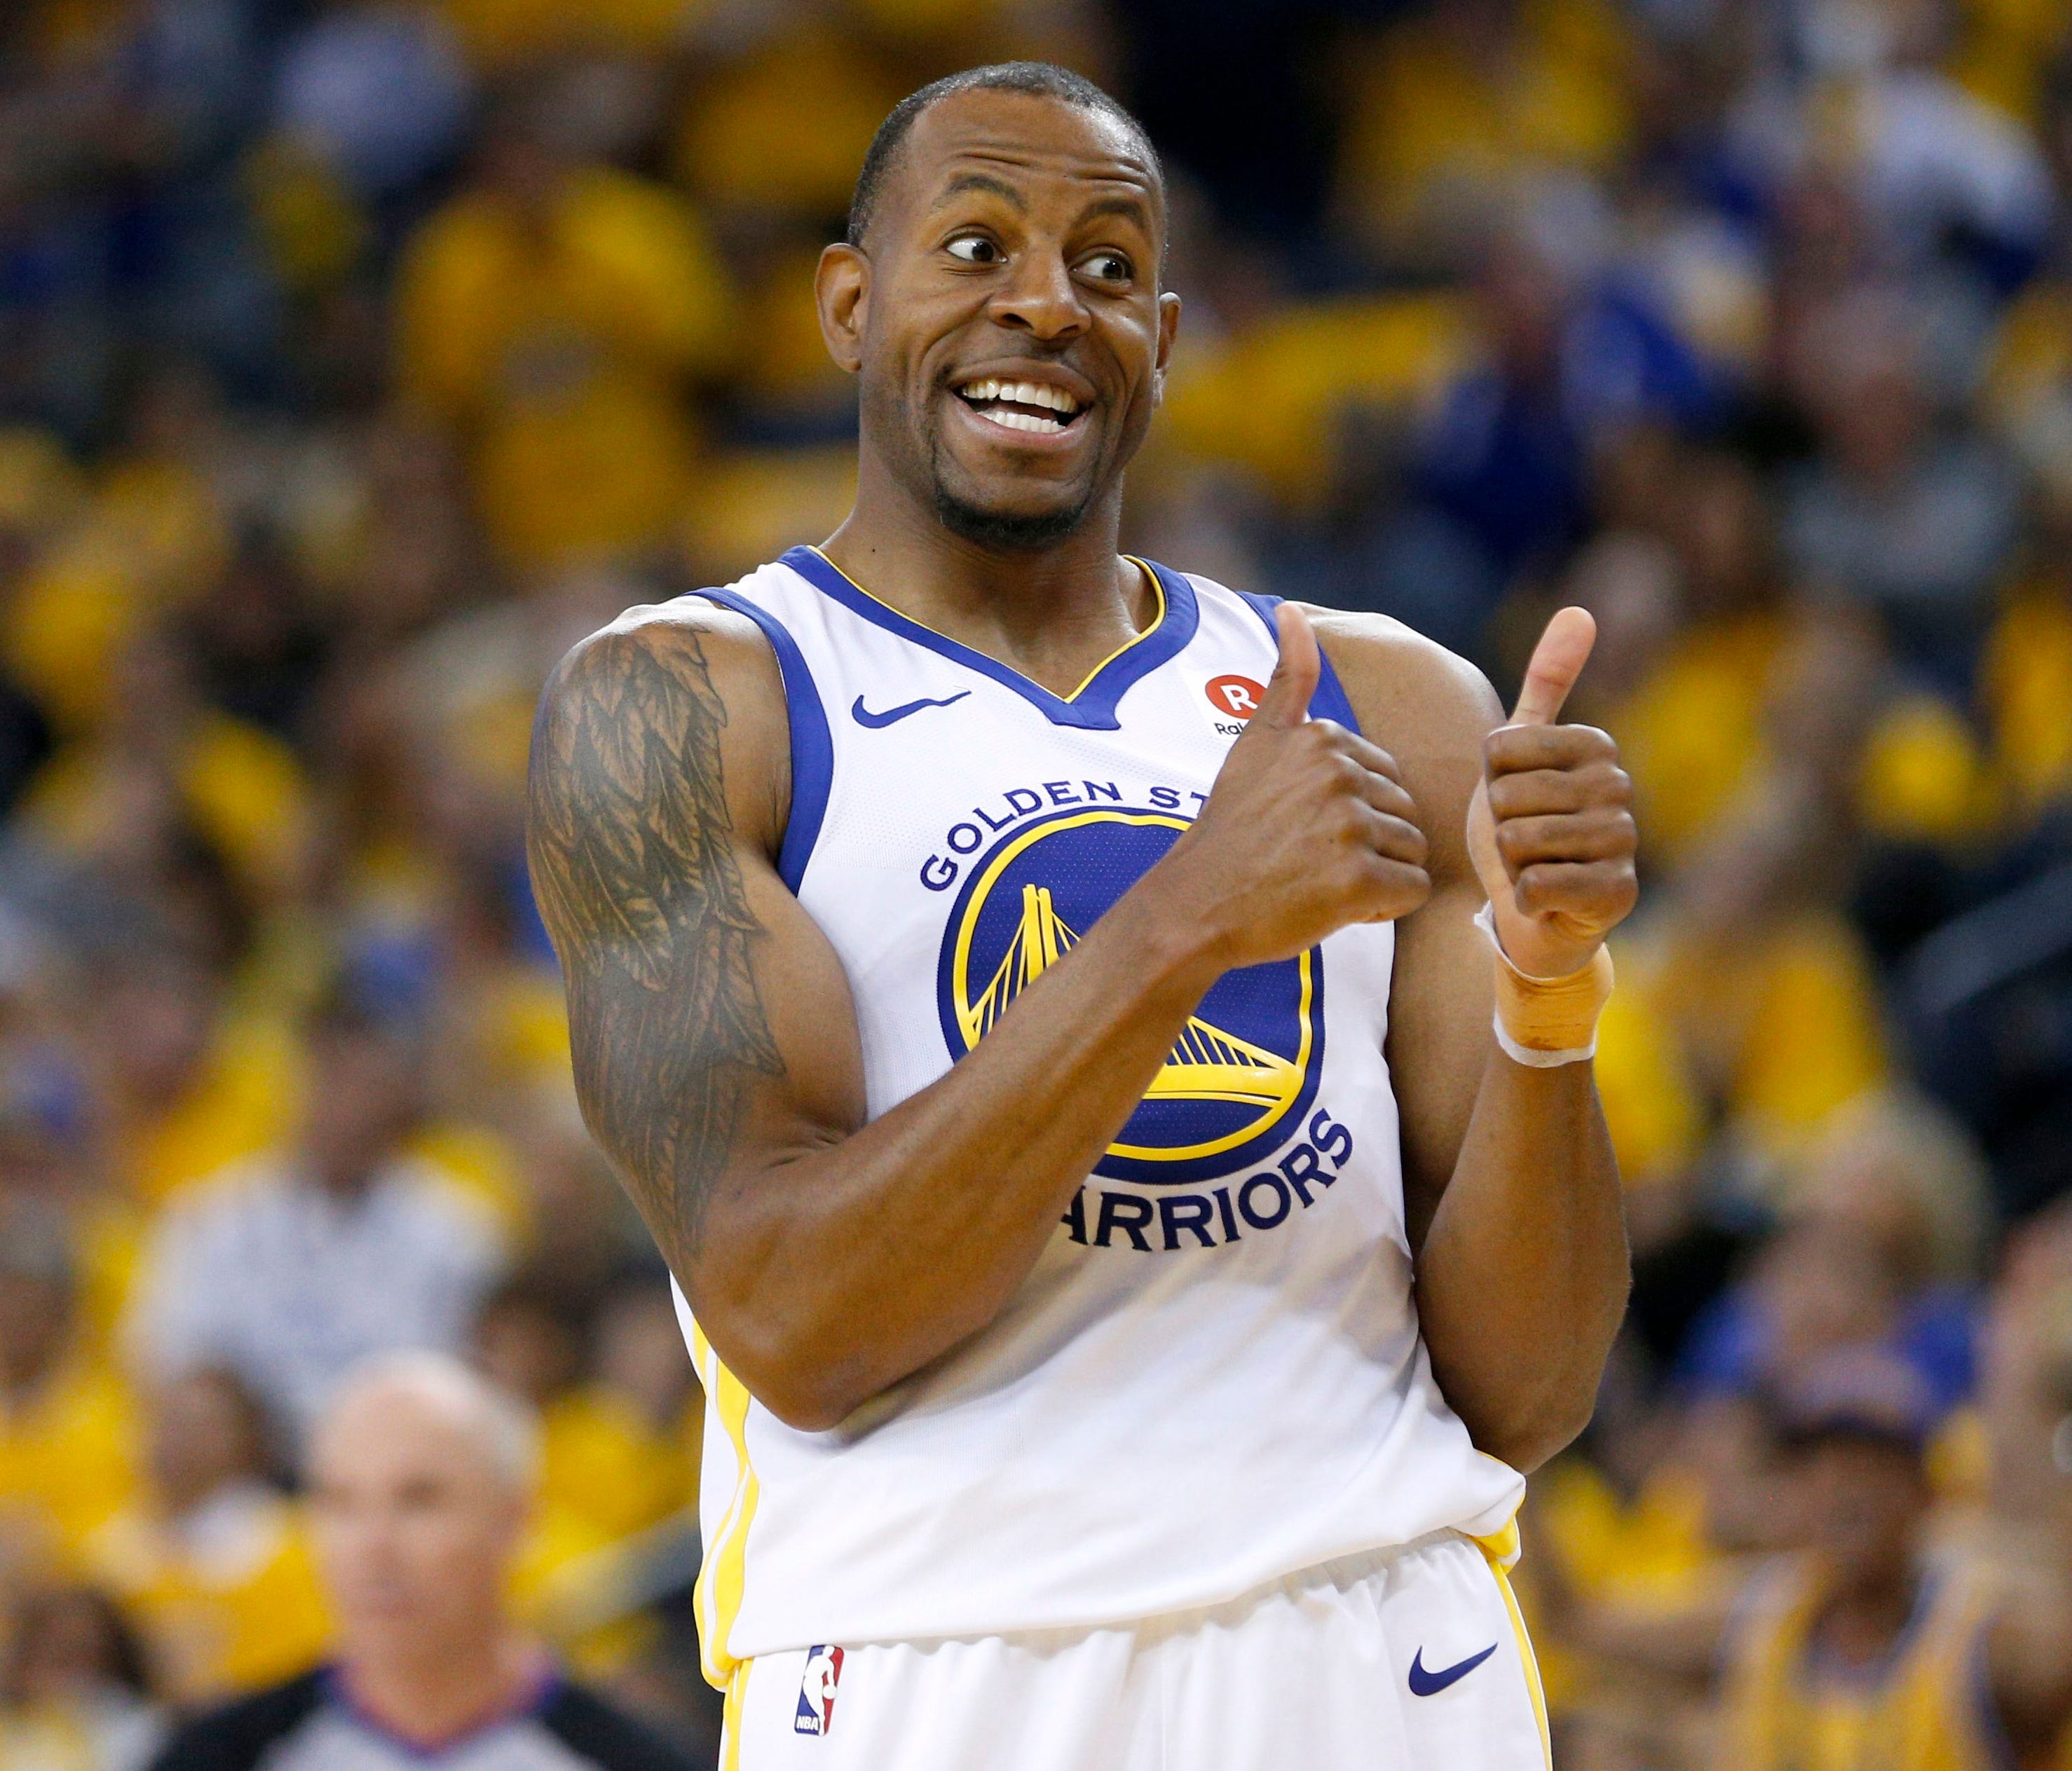 Andre Iguodala is as close as it comes to a LeBron James stopper in the NBA.